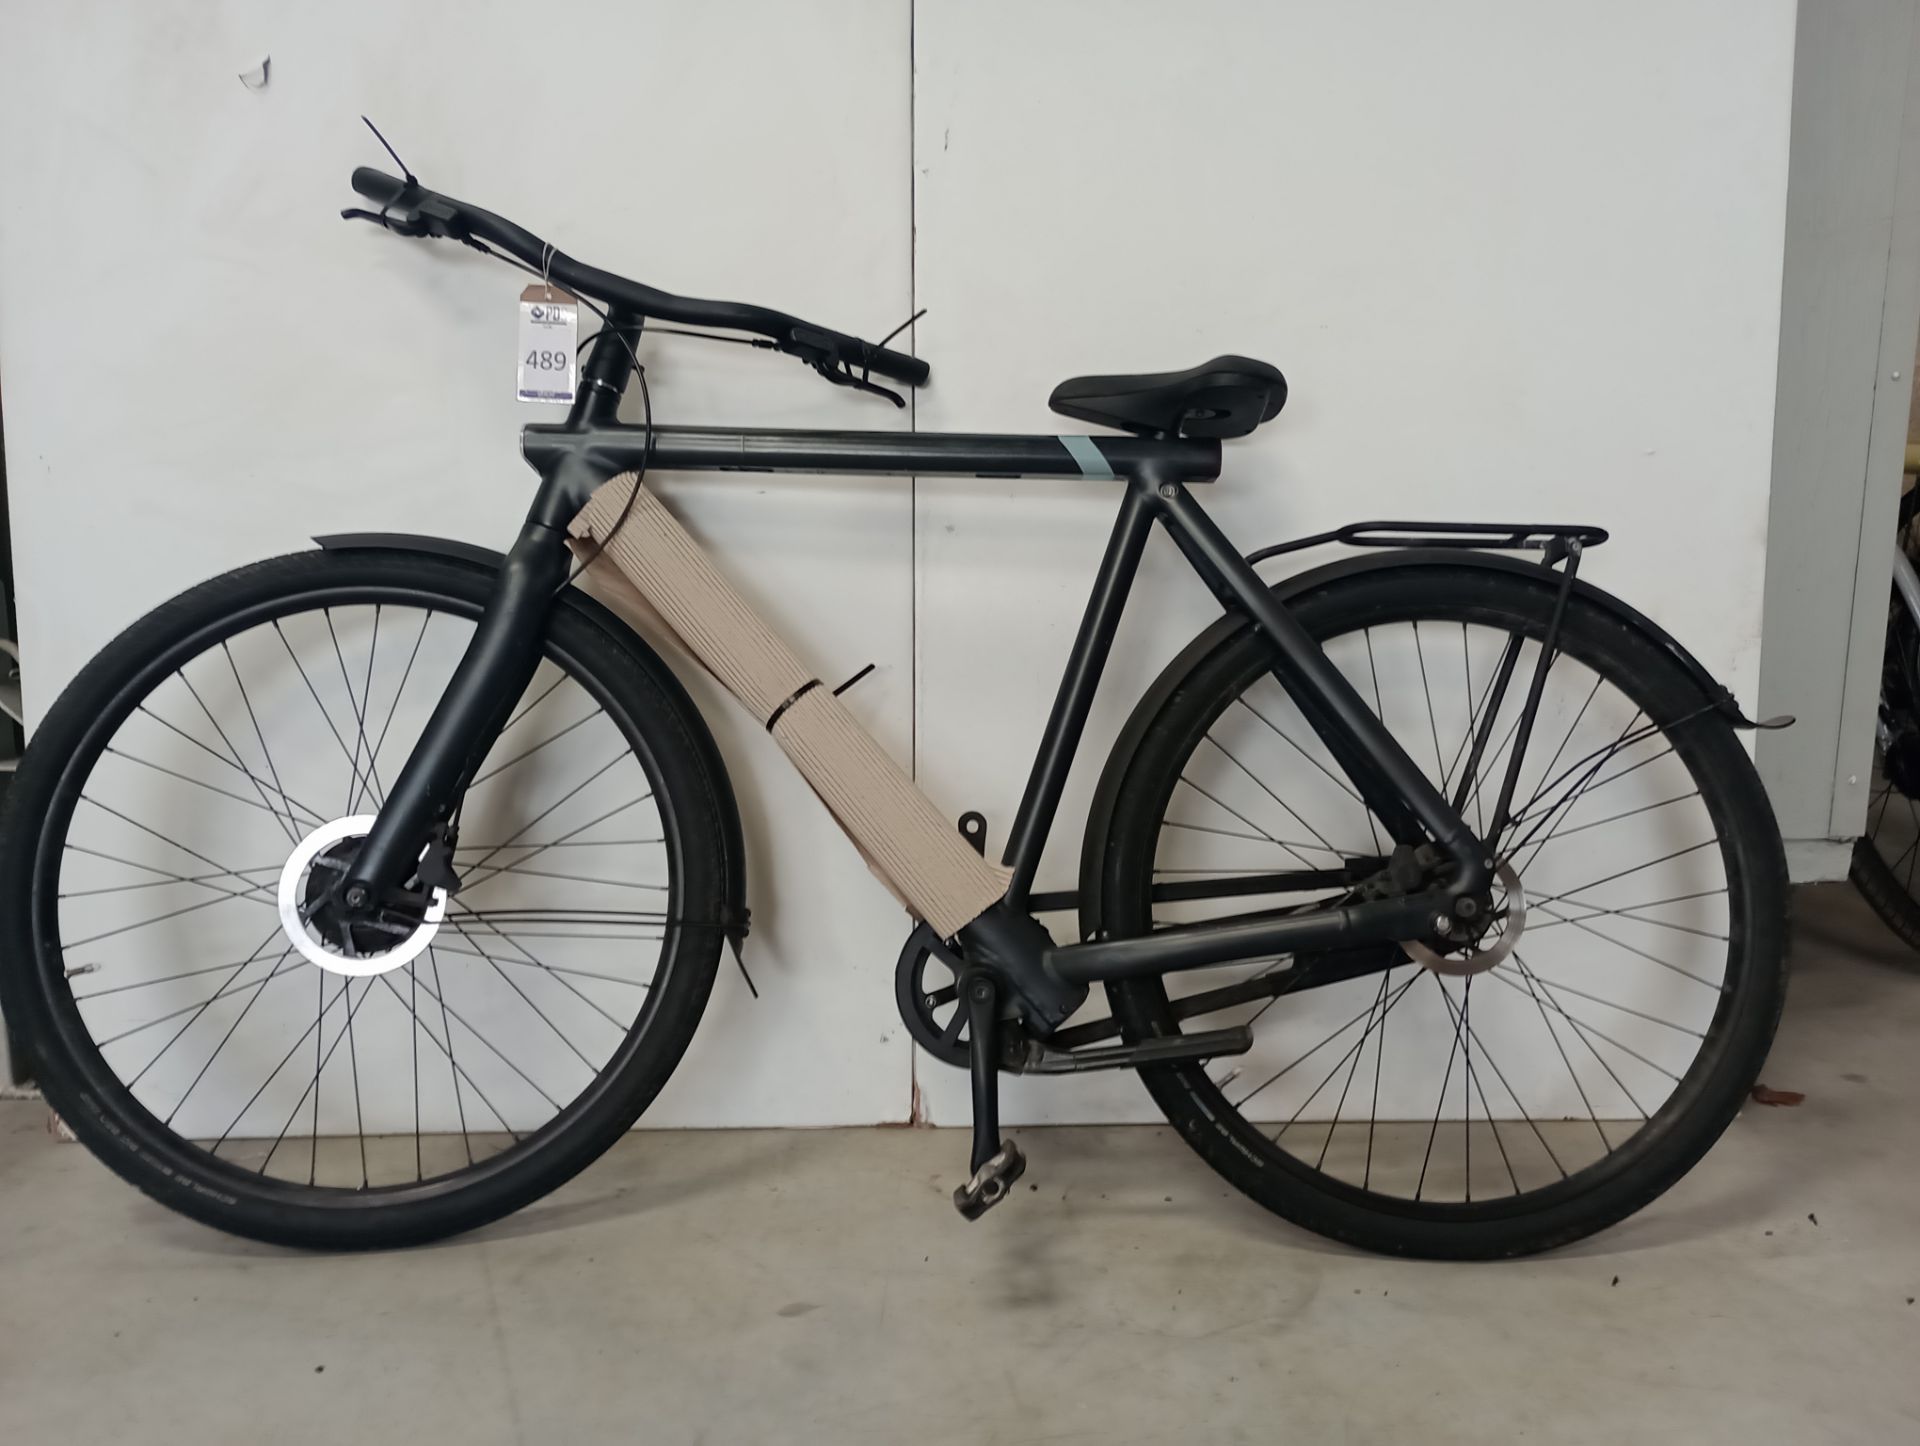 VanMoof S3 Electric Bike, Frame Number ASY1035020 (NOT ROADWORTHY - FOR SPARES ONLY) (No codes